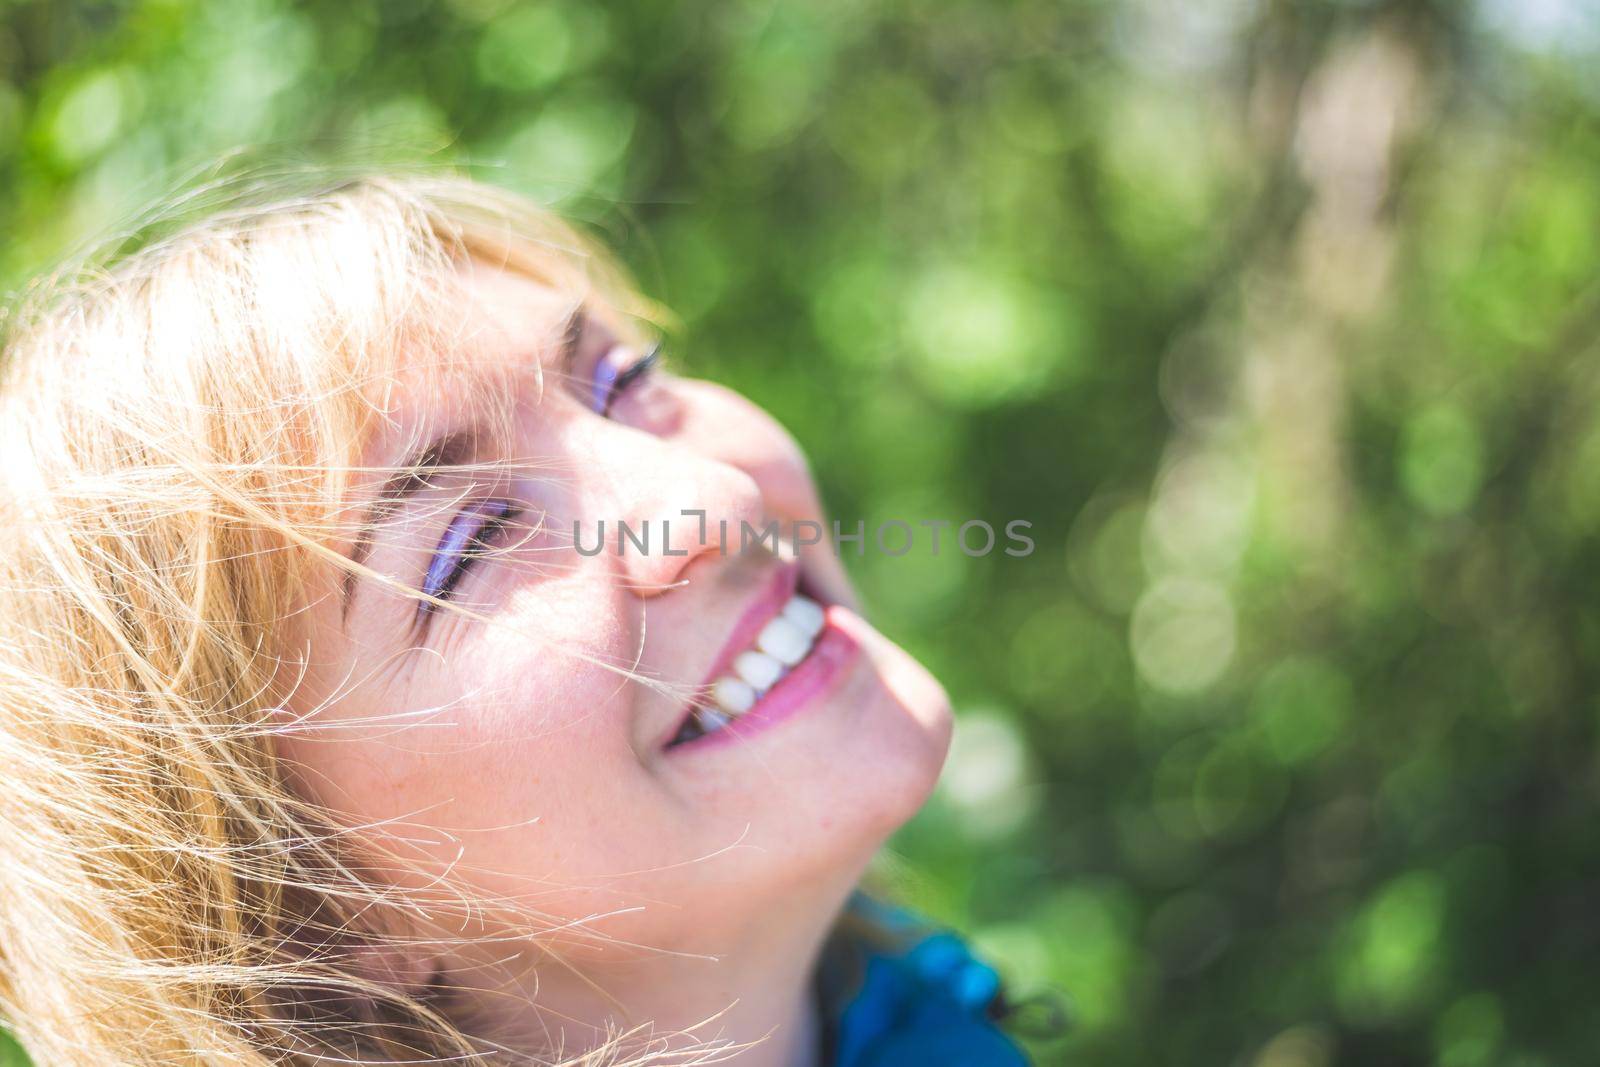 Smiling outdoors in spring. Portrait of smiling blonde girl outdoors by Daxenbichler